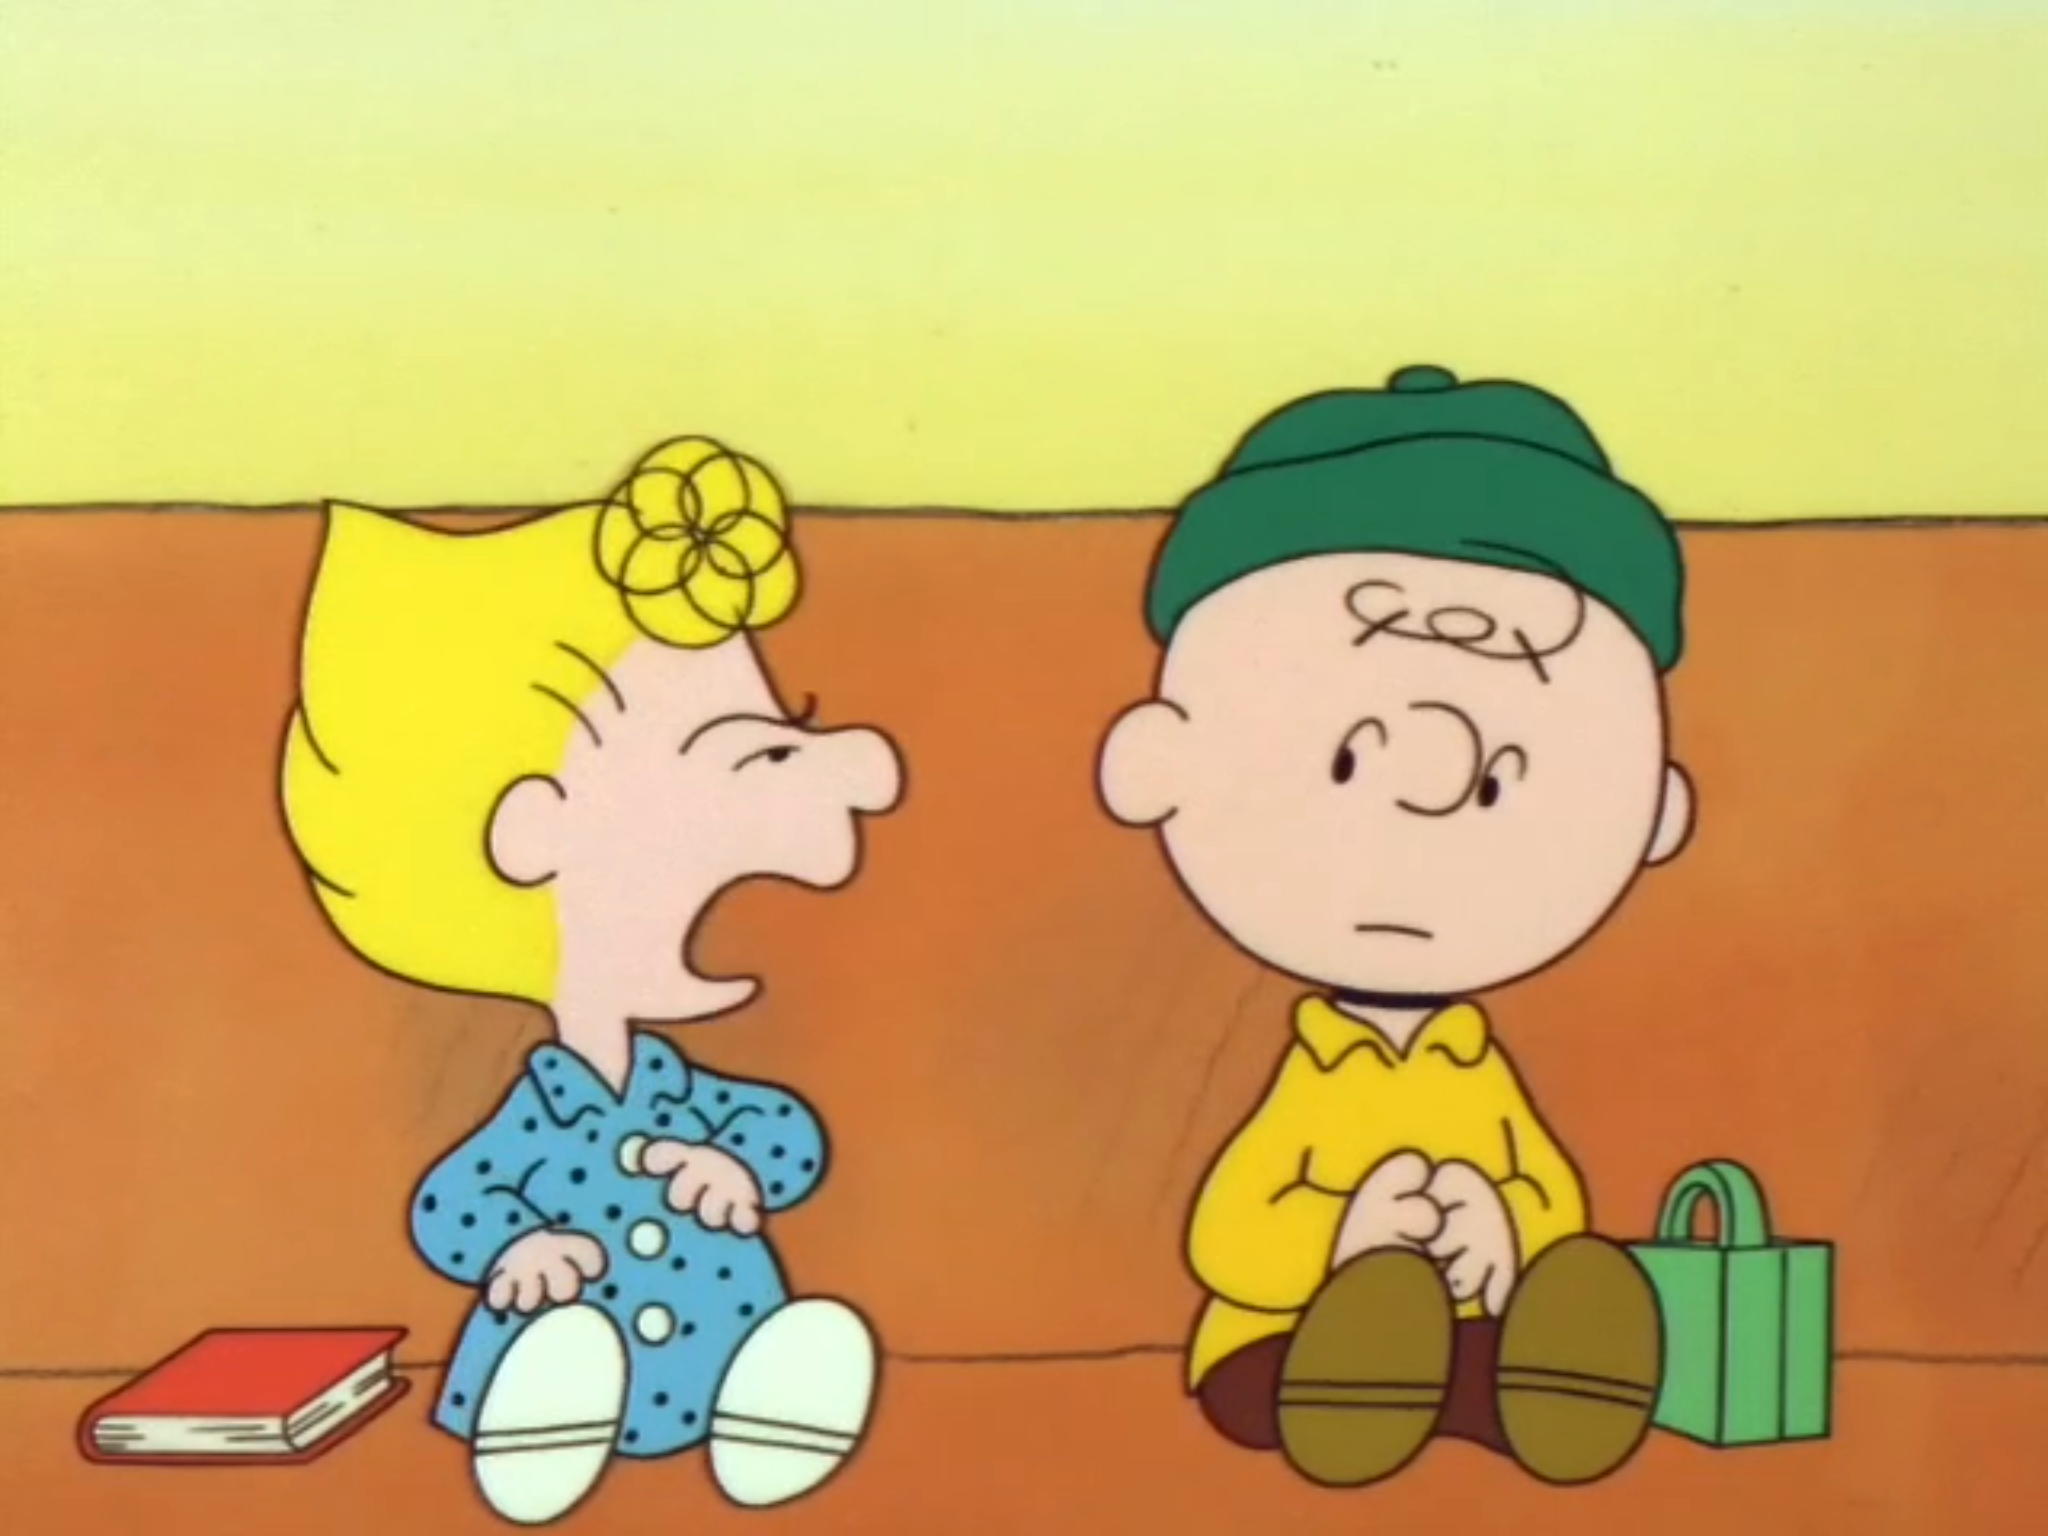 charlie brown characters